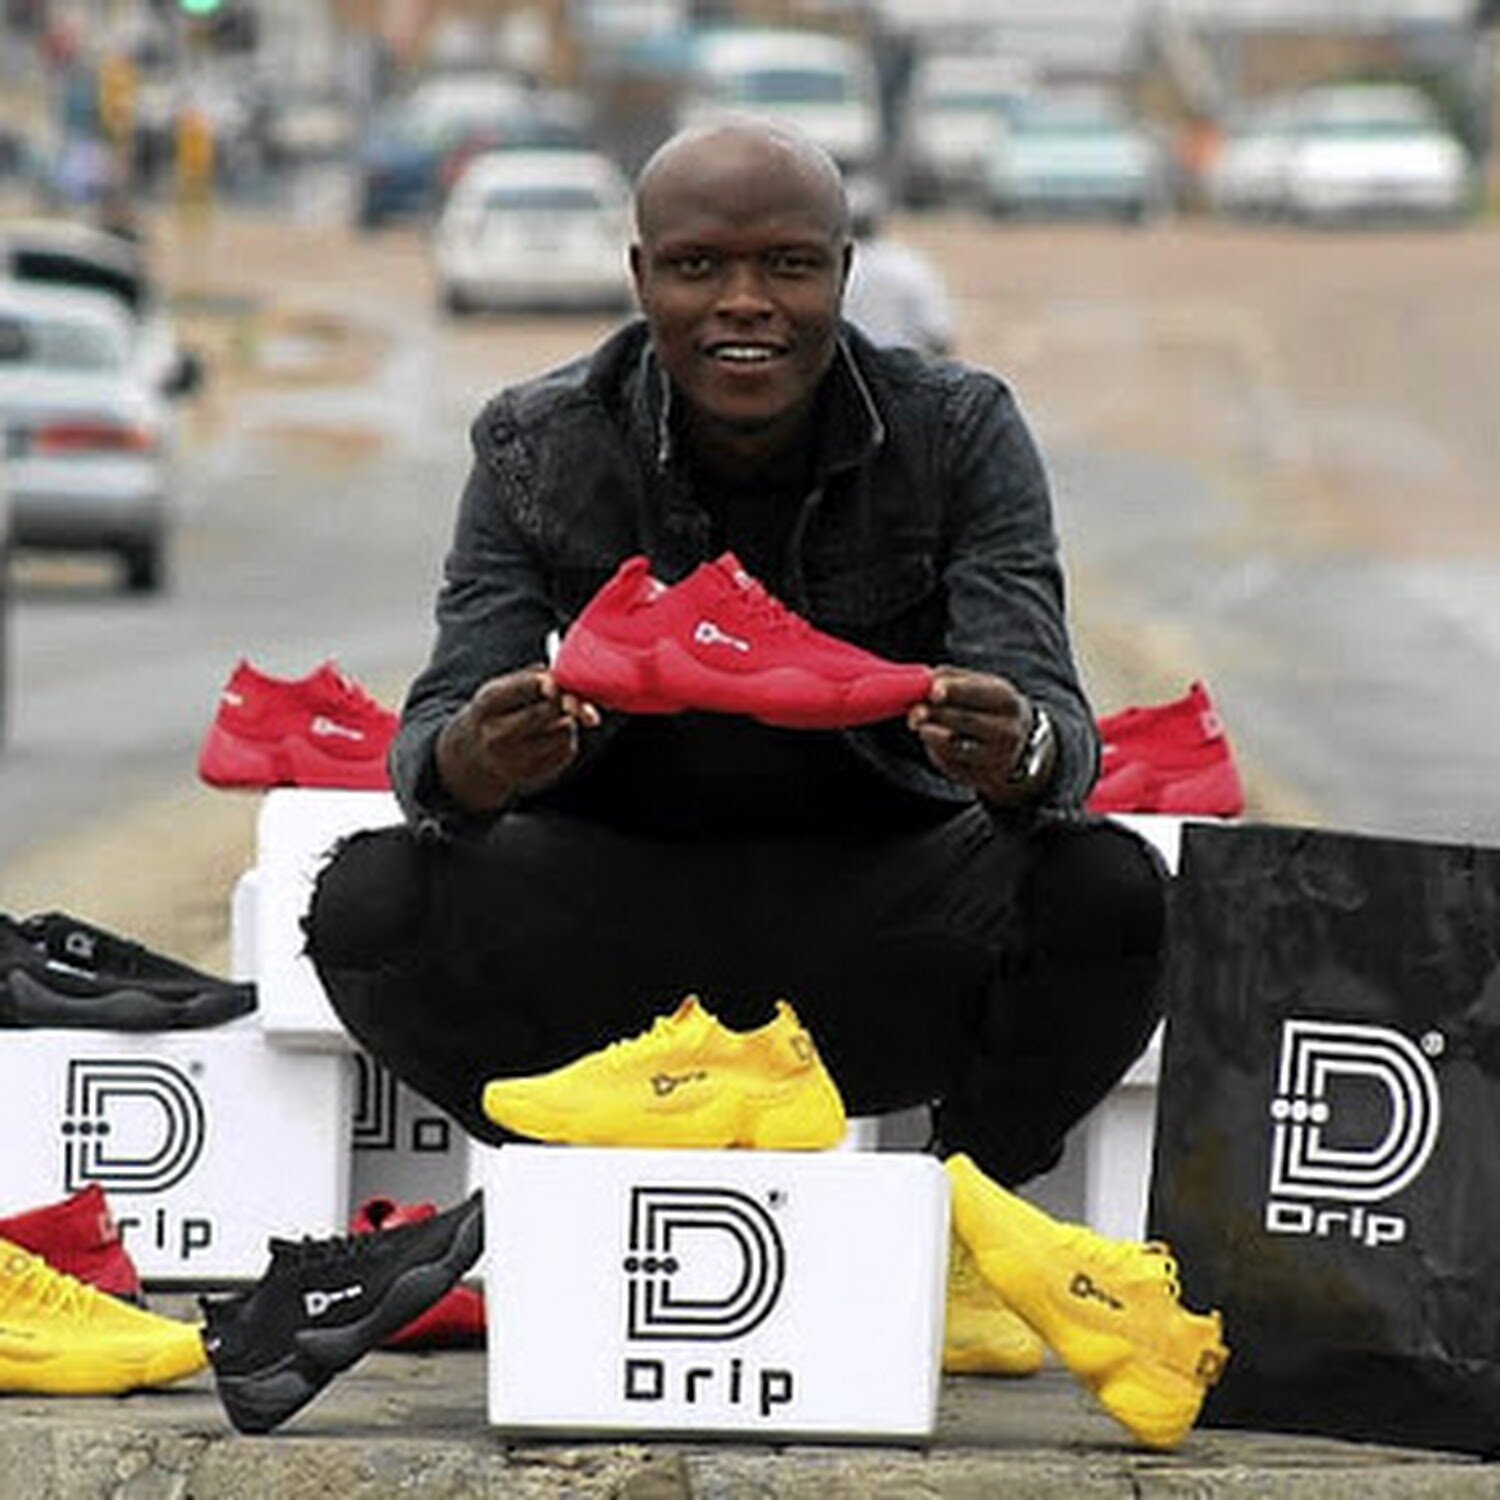 How the Drip sneaker business is stepping up in the face of COVID-19